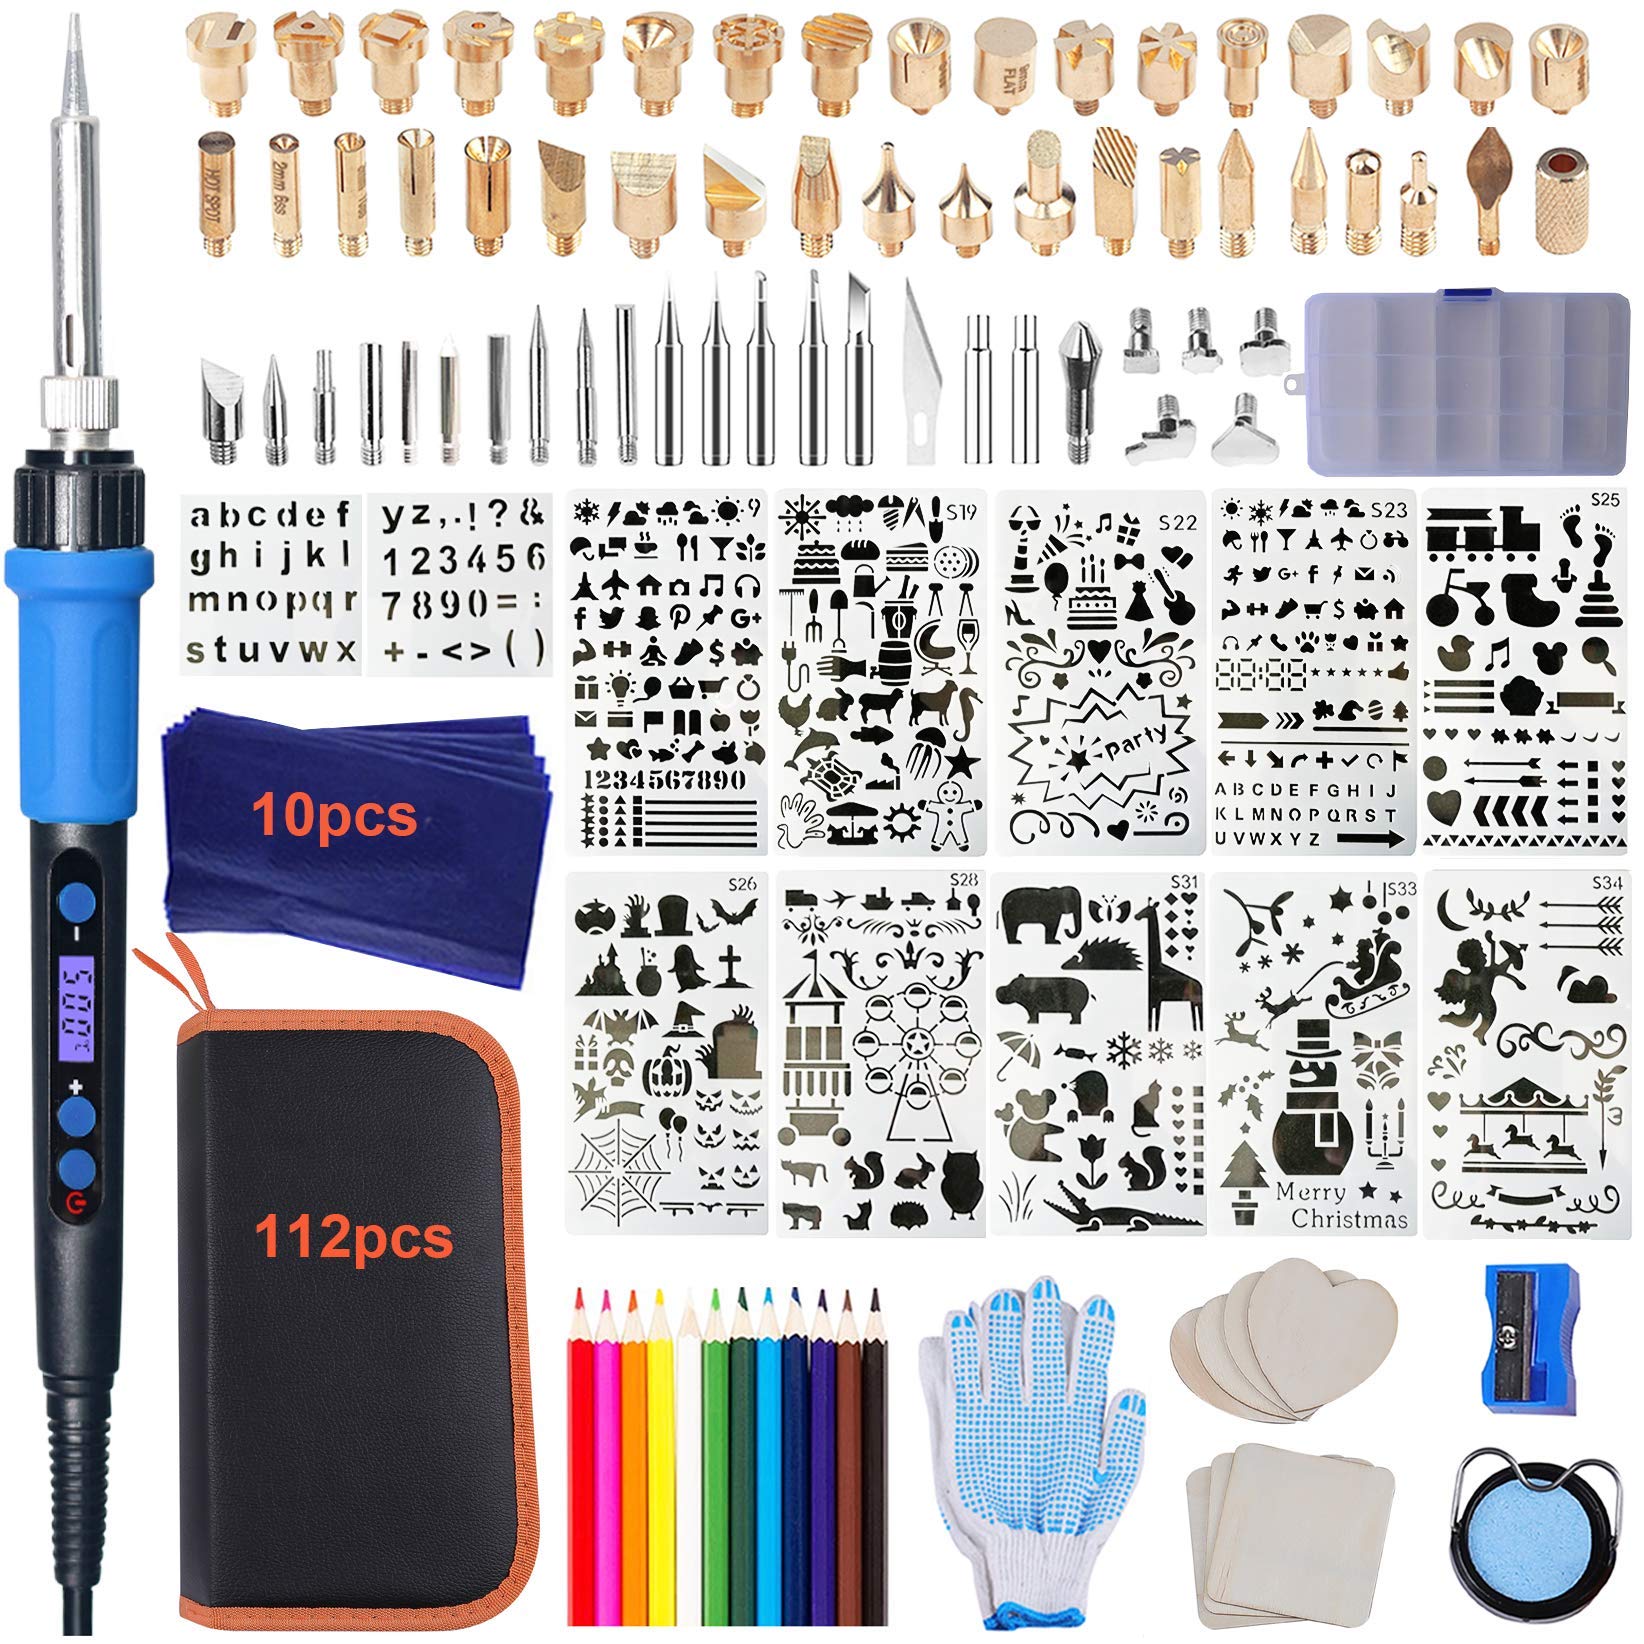 112PCS Calegency Wood Burning Kit-Wood Burning Tool Set with Digital LCD  Display Pyrography Pen Adjustable Temperature and  Embossing/Carving/Soldering/Engraving Tips for Wooden Crafts Blue